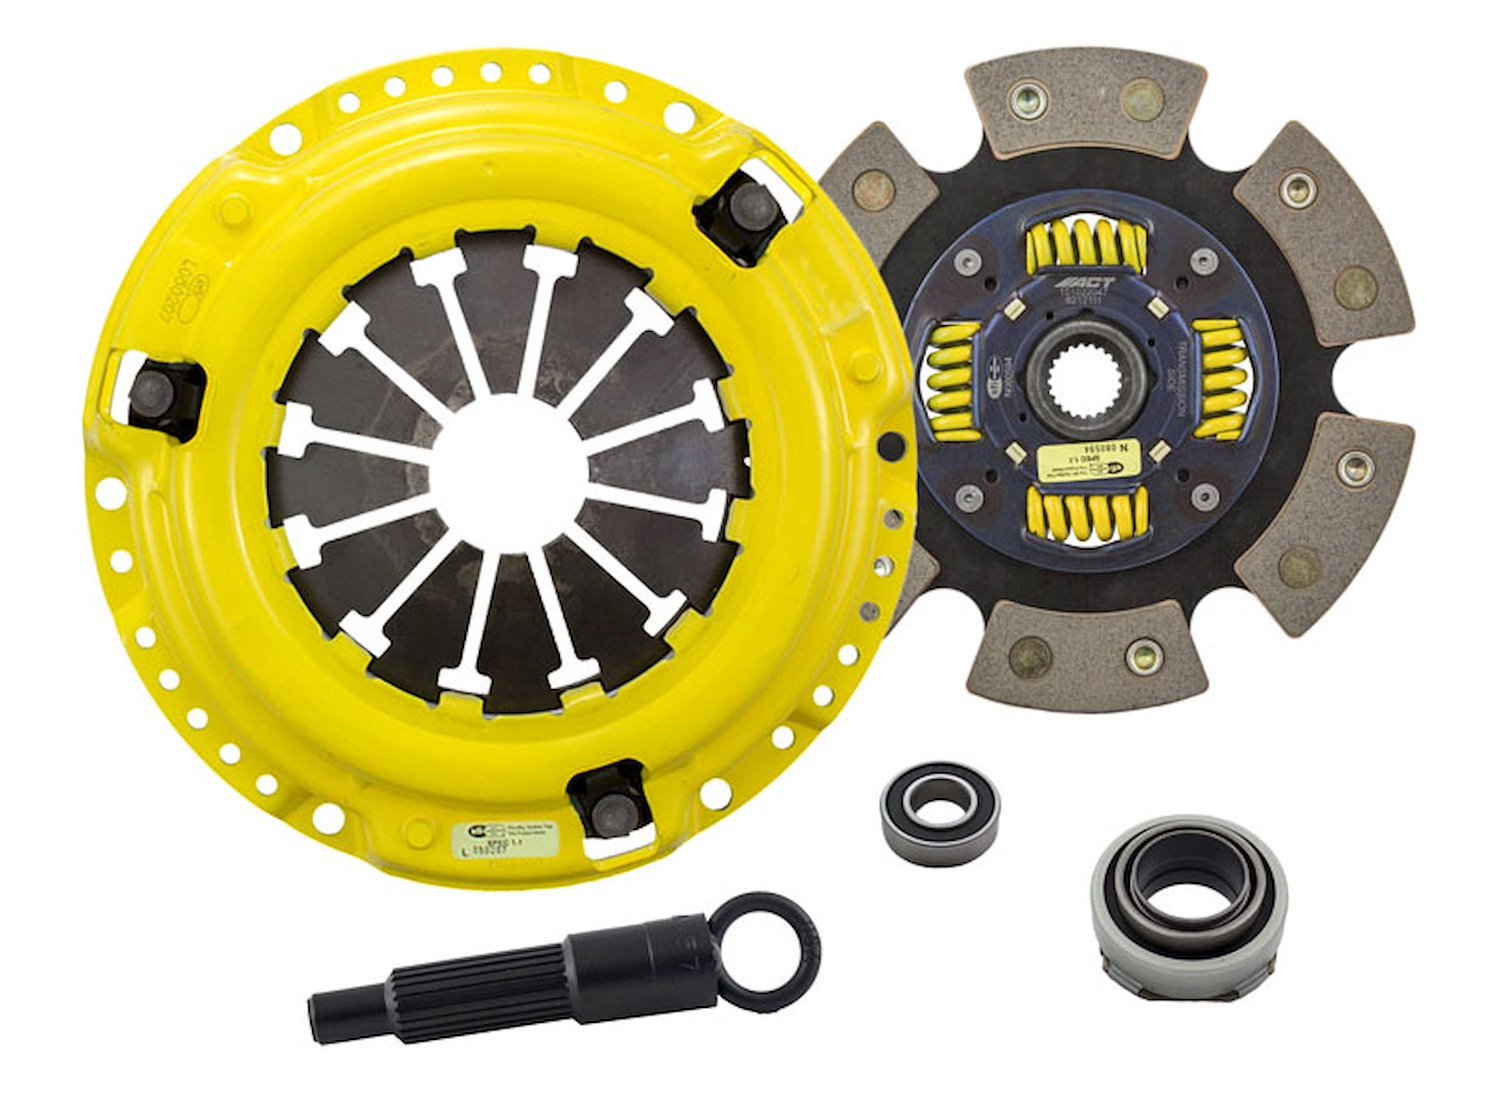 MaXX/Race Sprung 6-Pad Transmission Clutch Kit Fits Select Acura/Honda